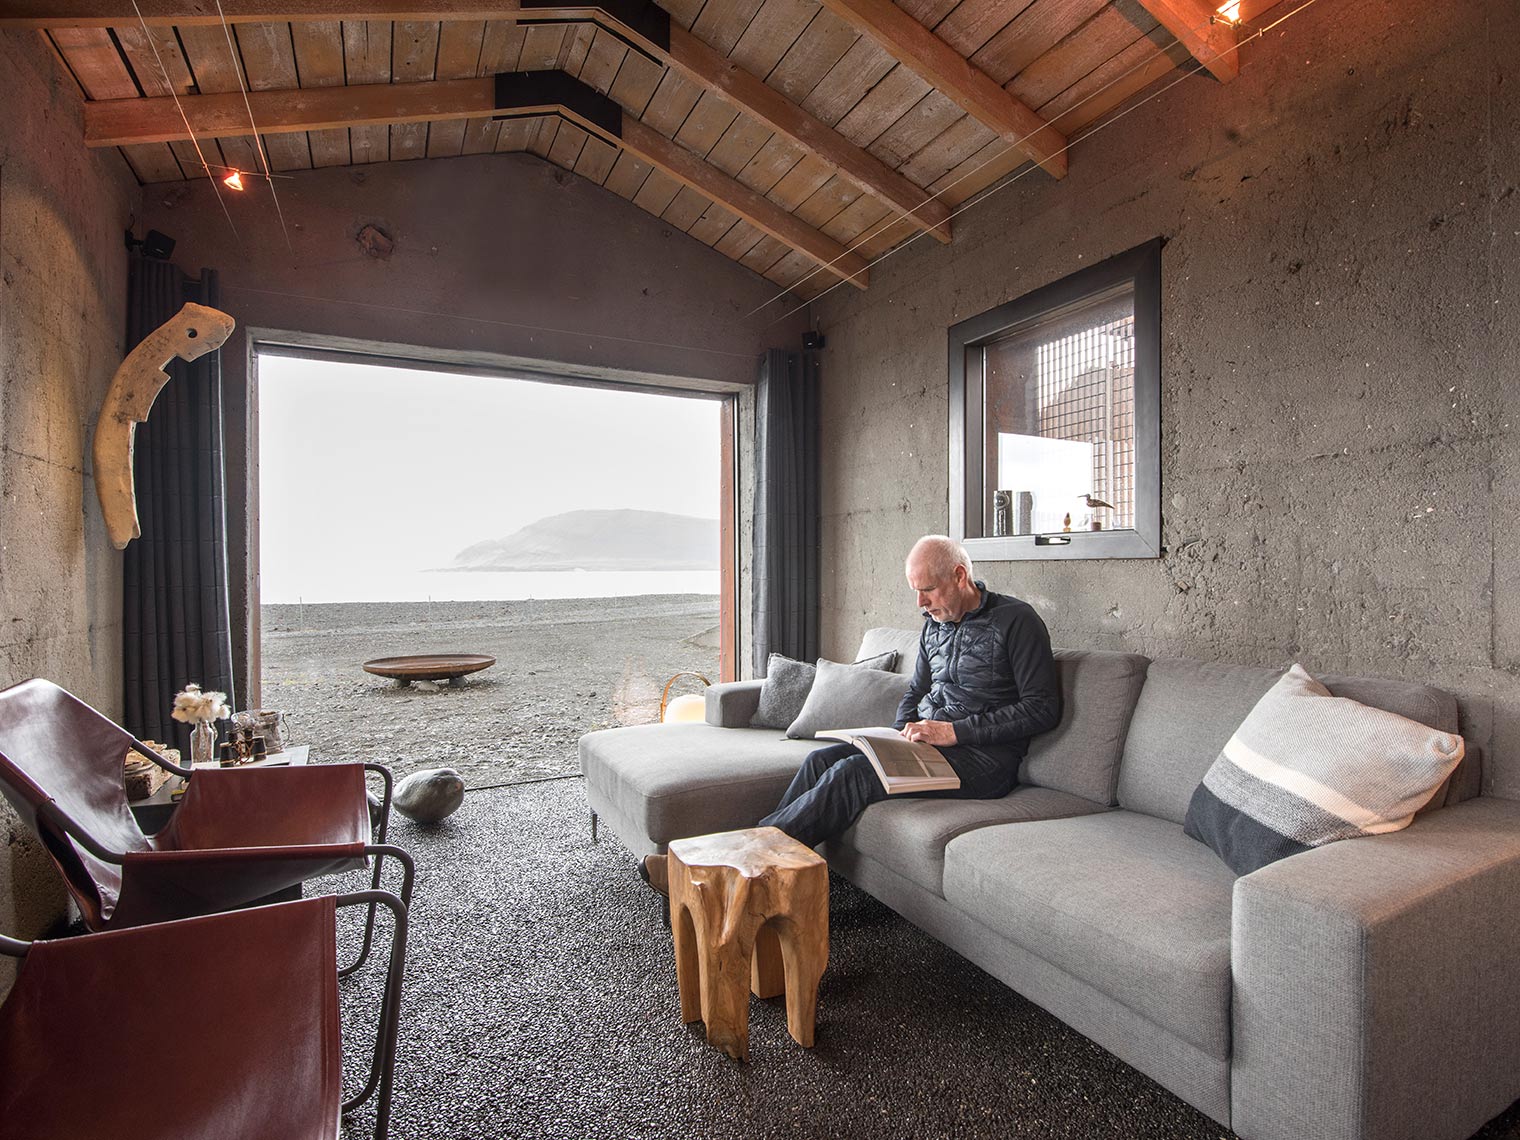 PK ARKITEKTAR | Concrete Factory Turned Into A Vacation Cabin - Iceland